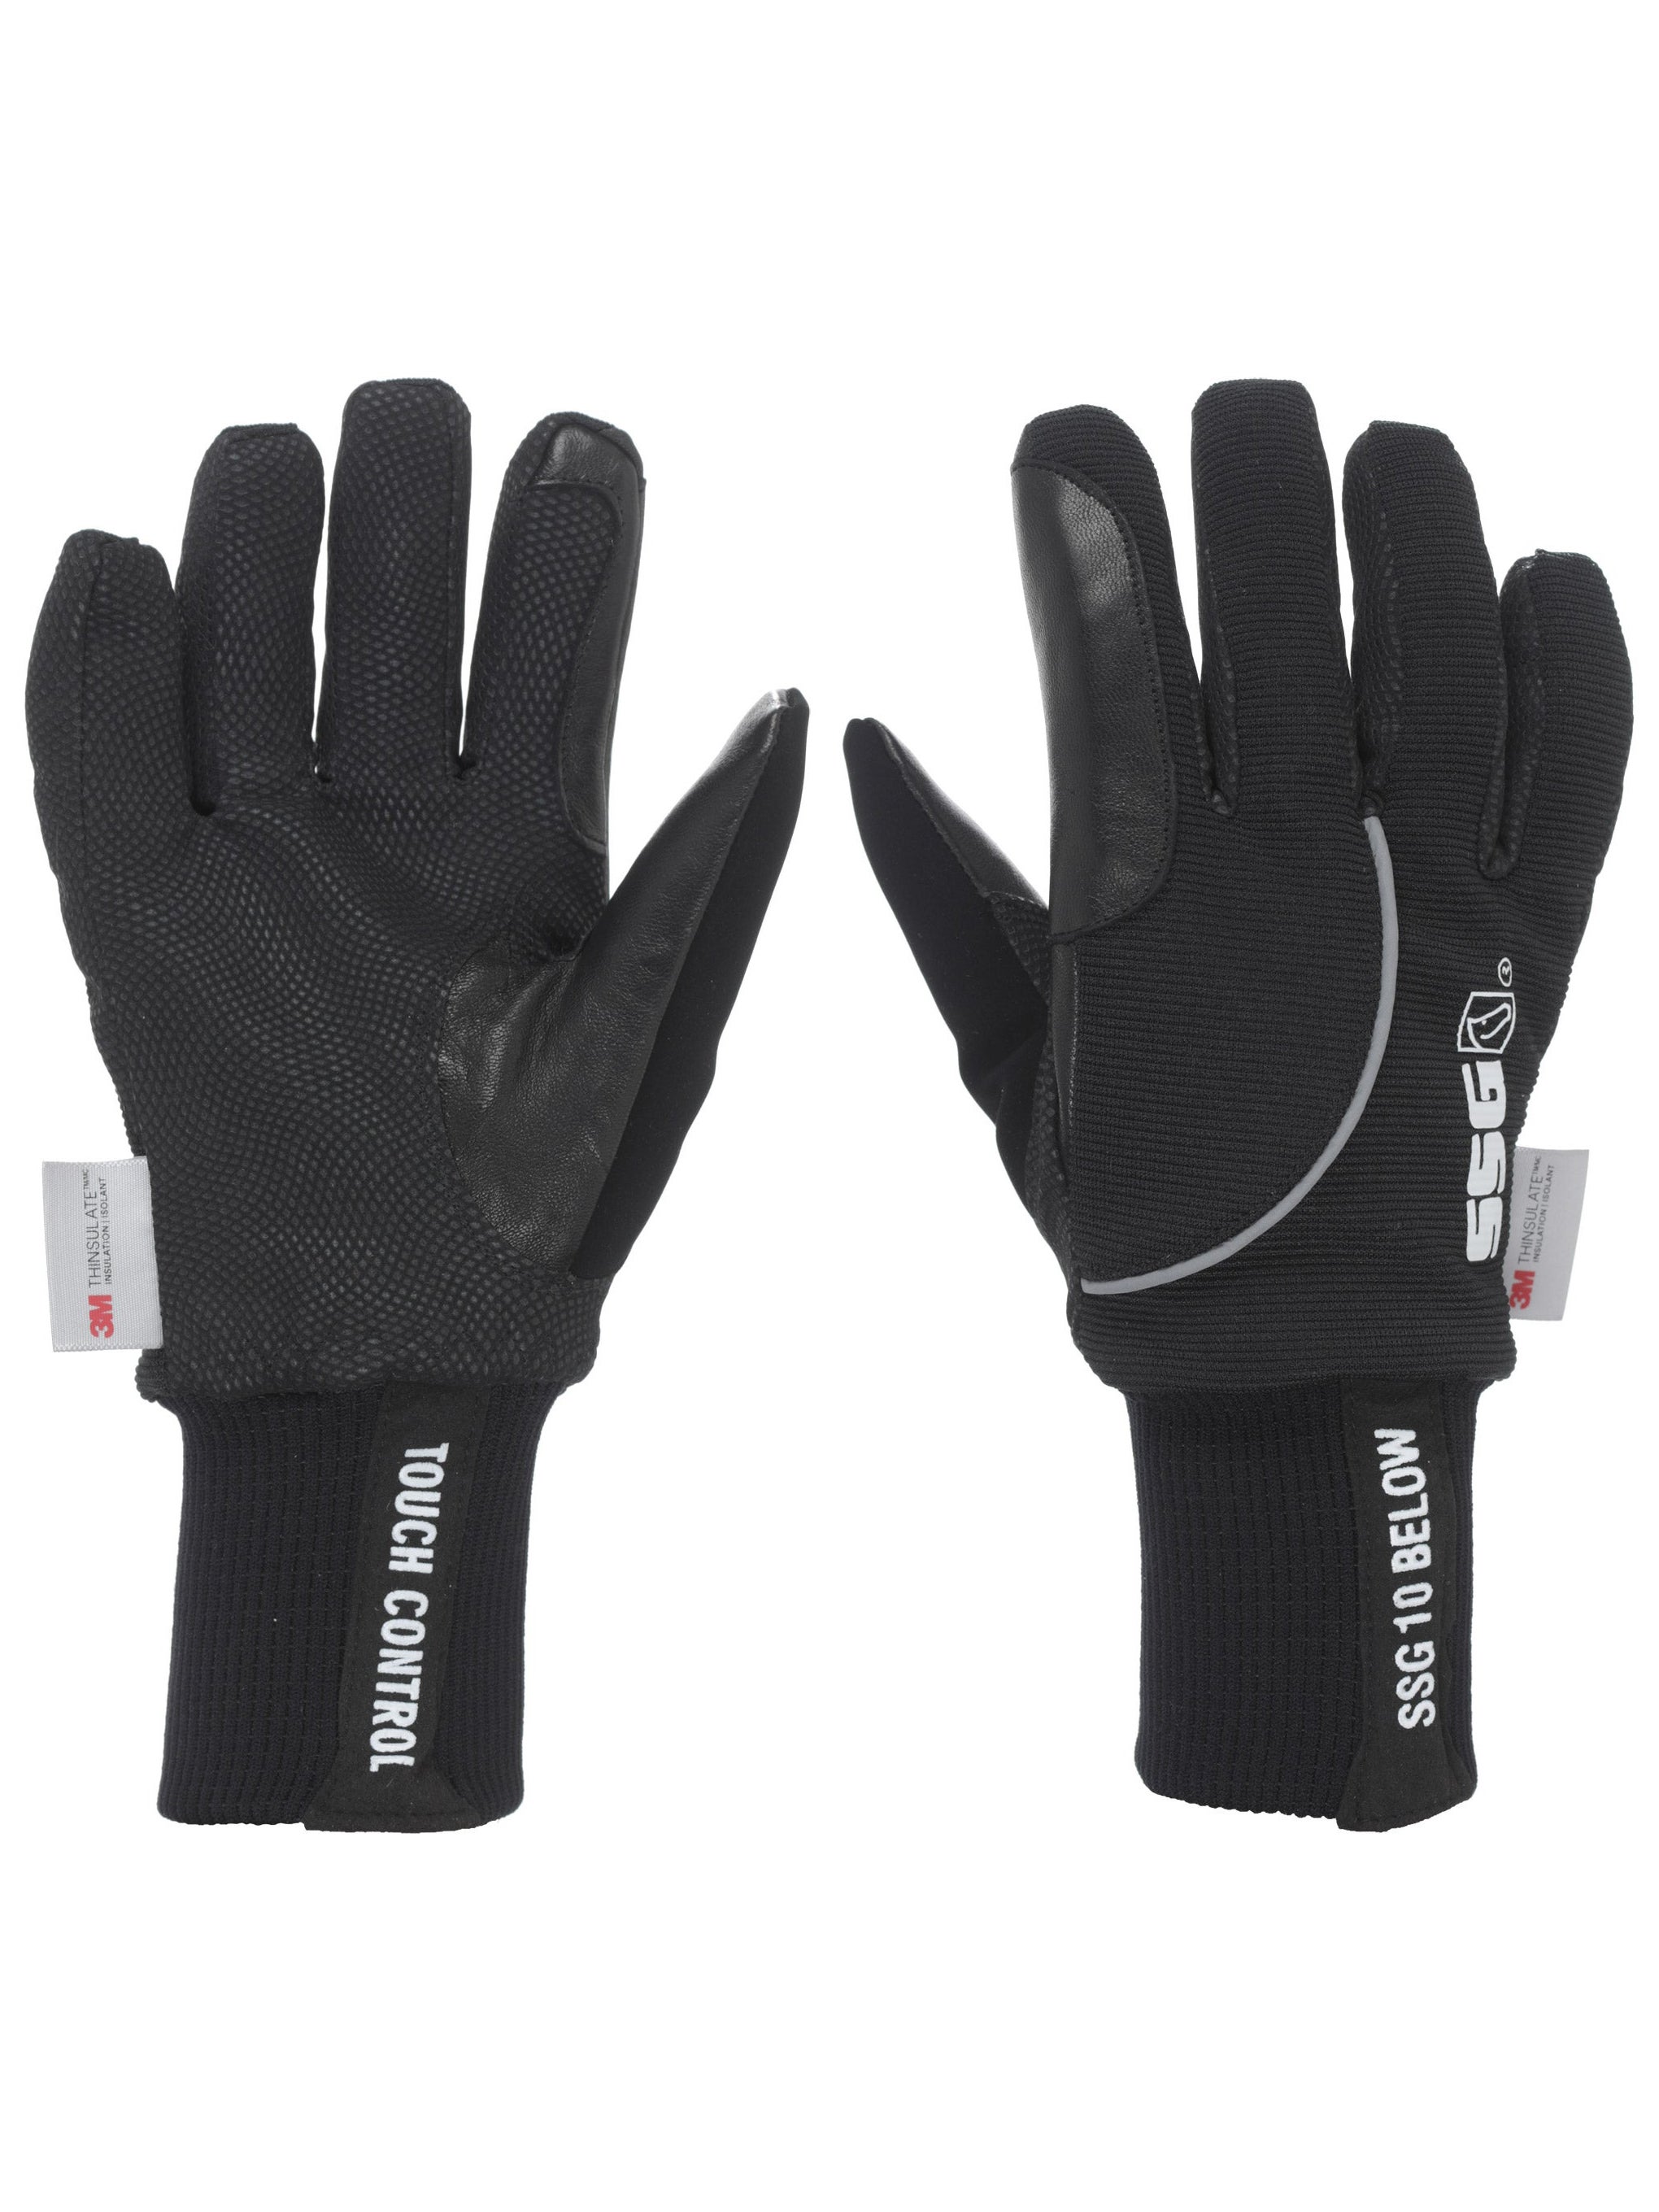 SSG 10 Below Gloves Last Pair Size 6 Black Very Small Size Old Stock 